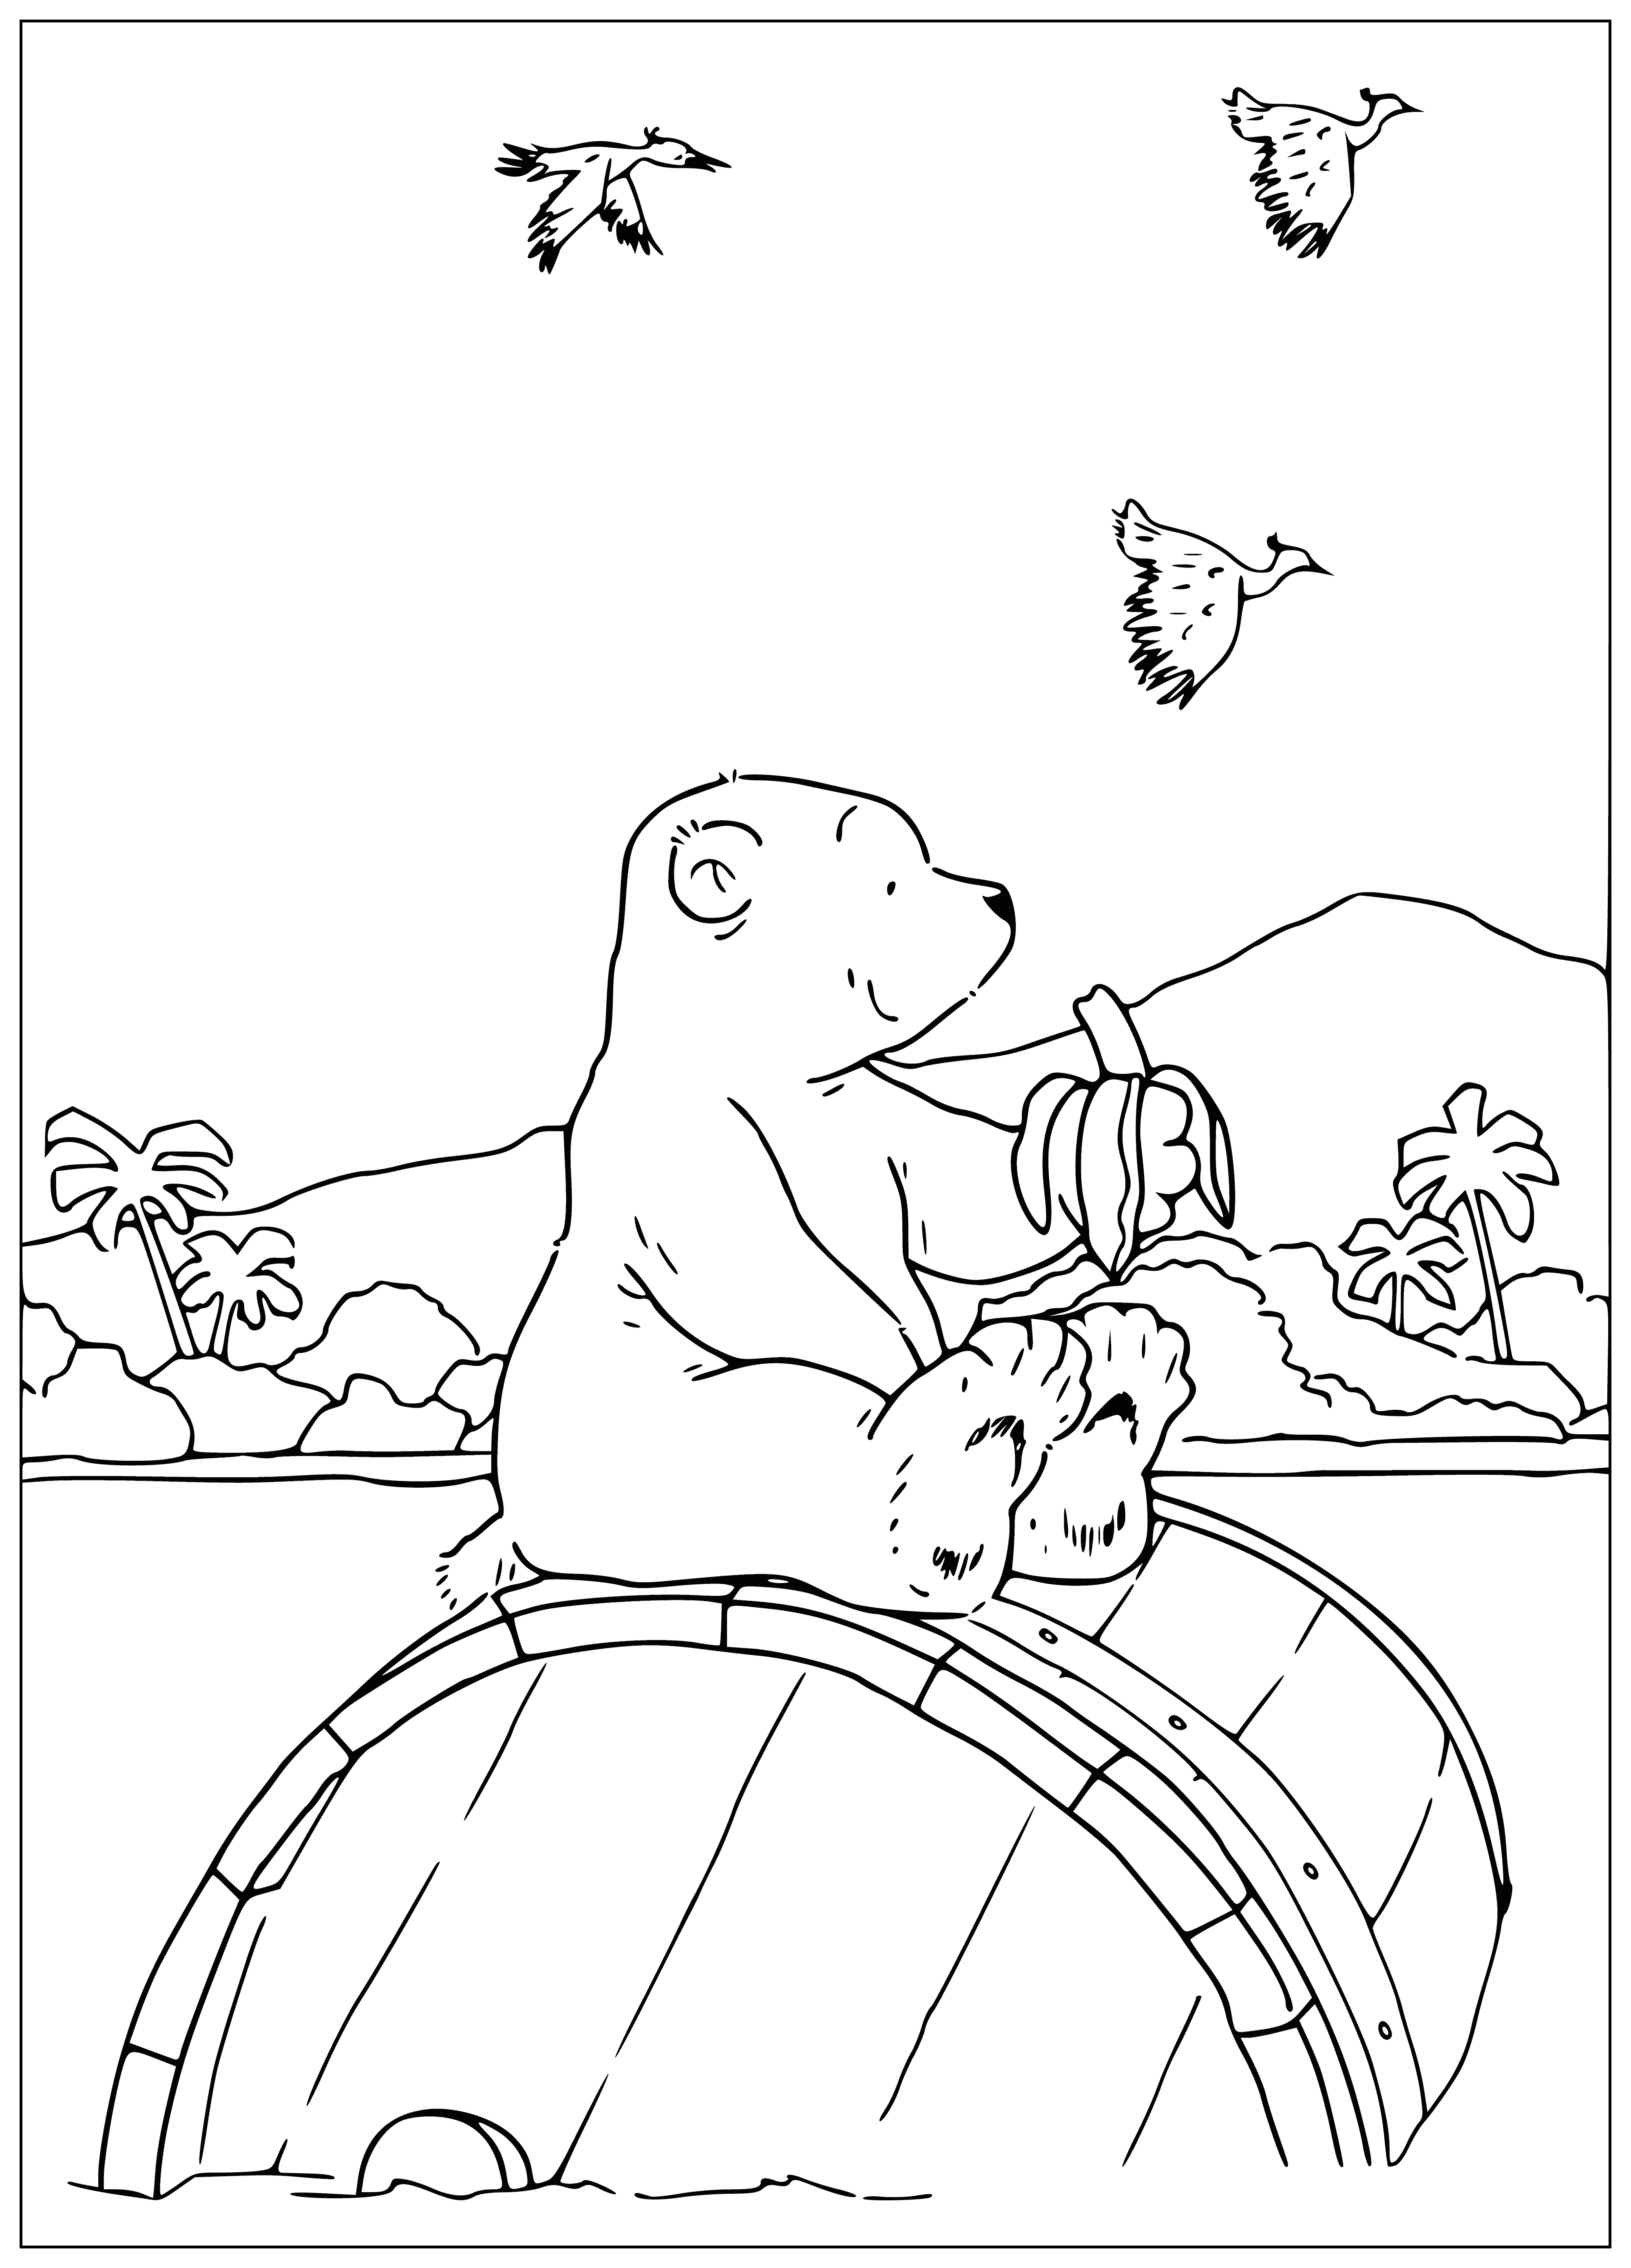 Lars swims on a barrel coloring page